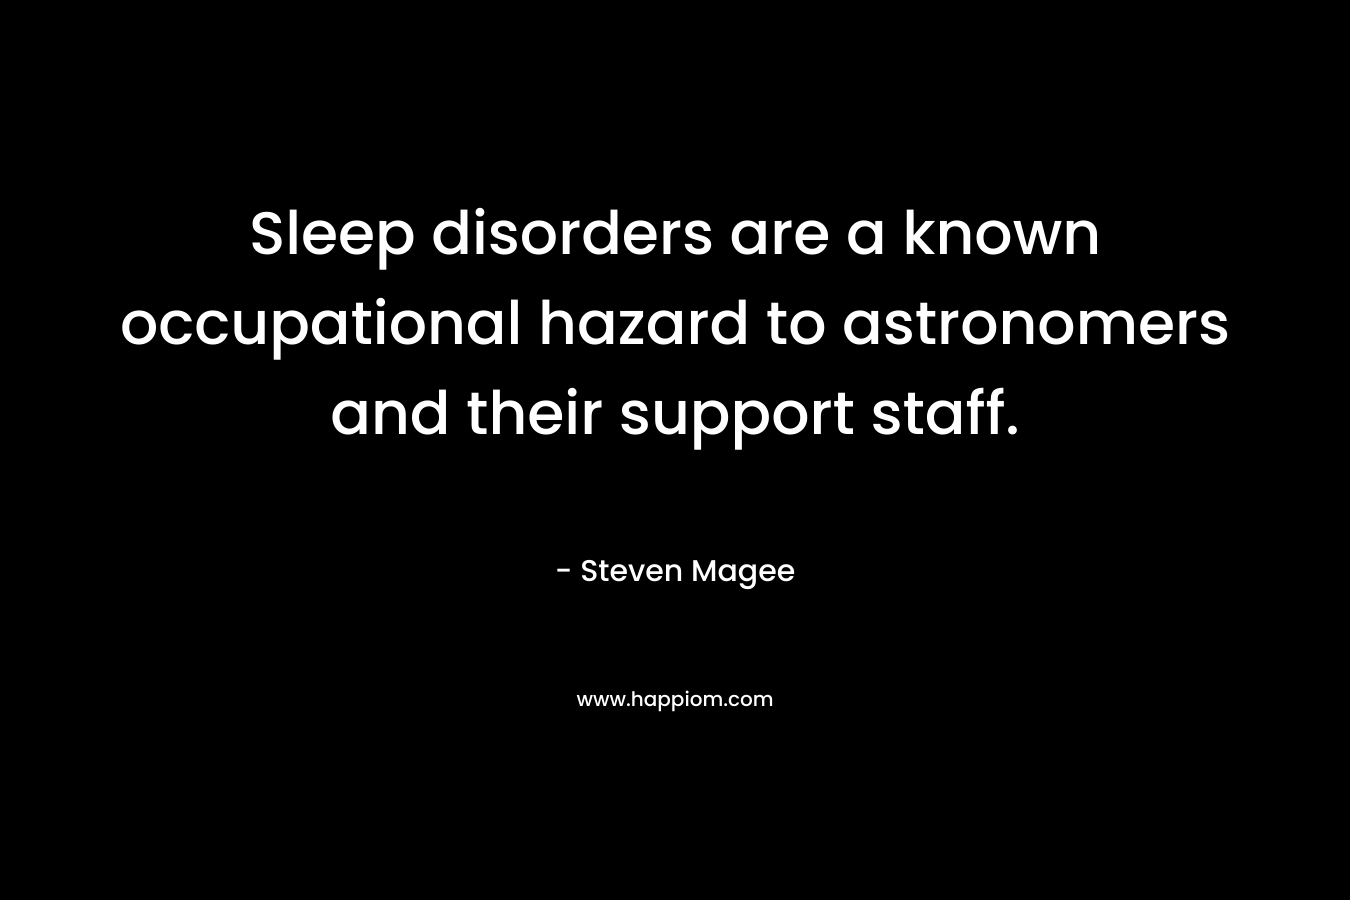 Sleep disorders are a known occupational hazard to astronomers and their support staff. – Steven Magee